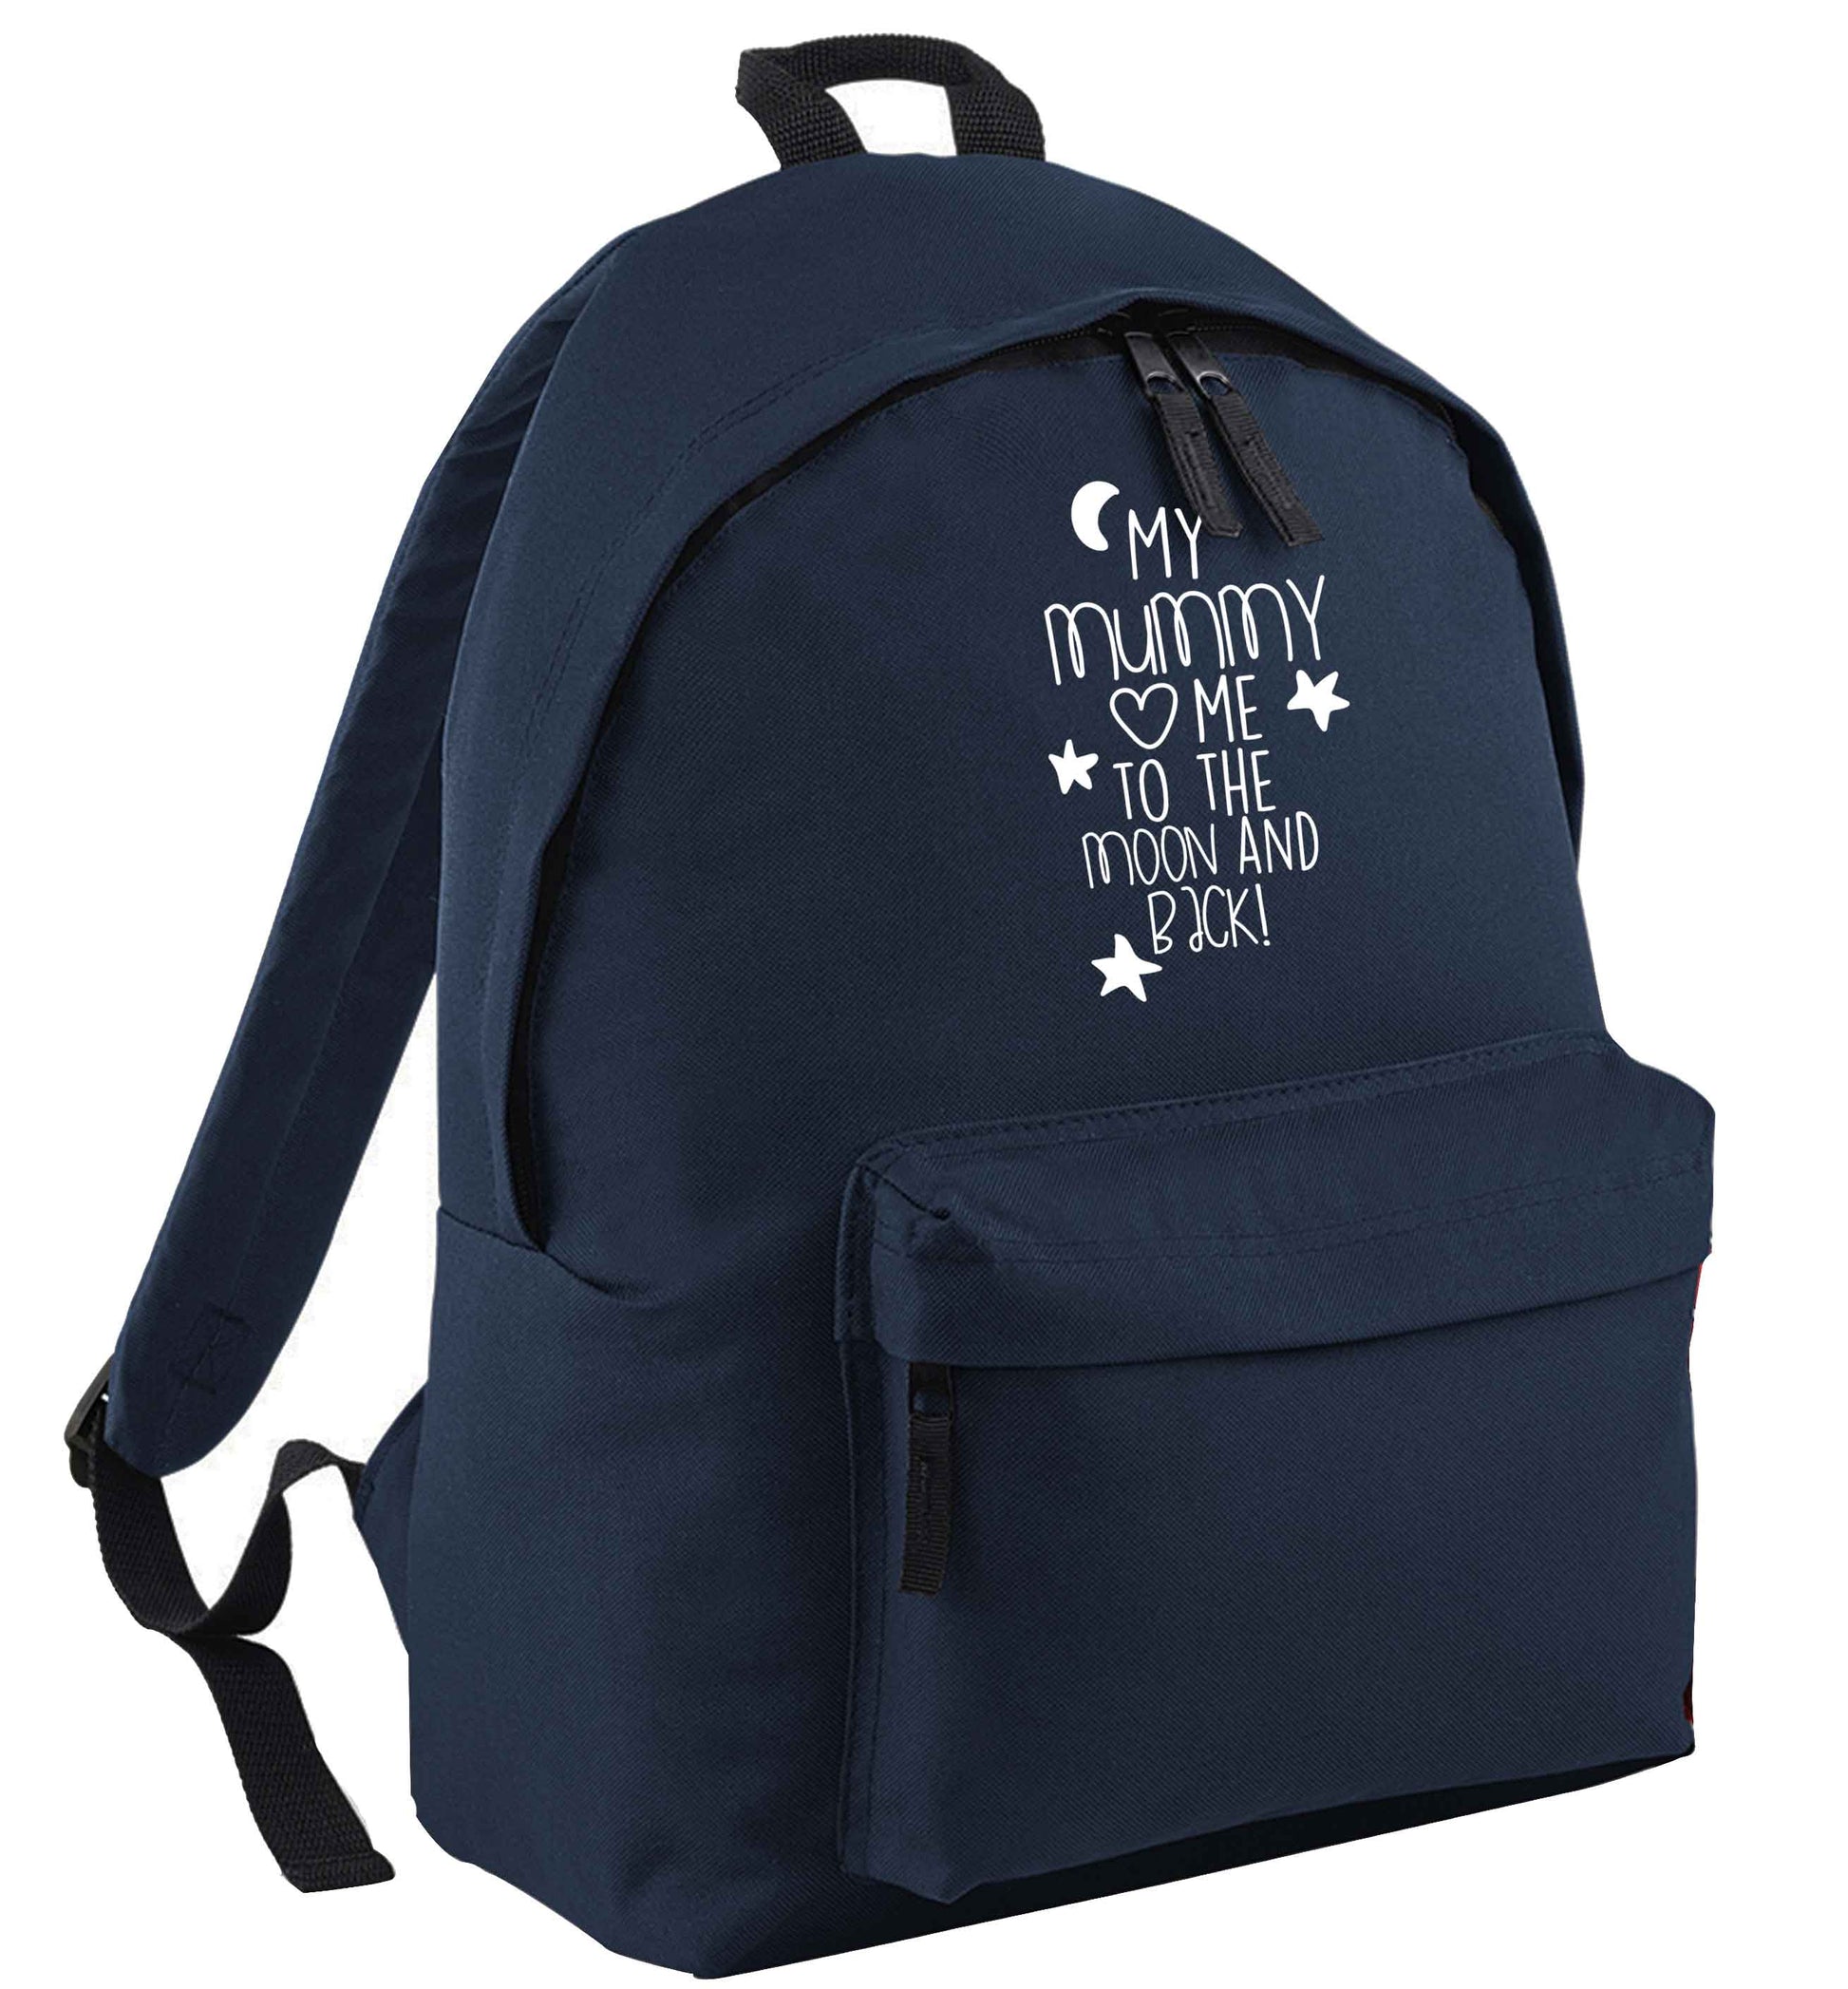 My mum loves me to the moon and back navy childrens backpack